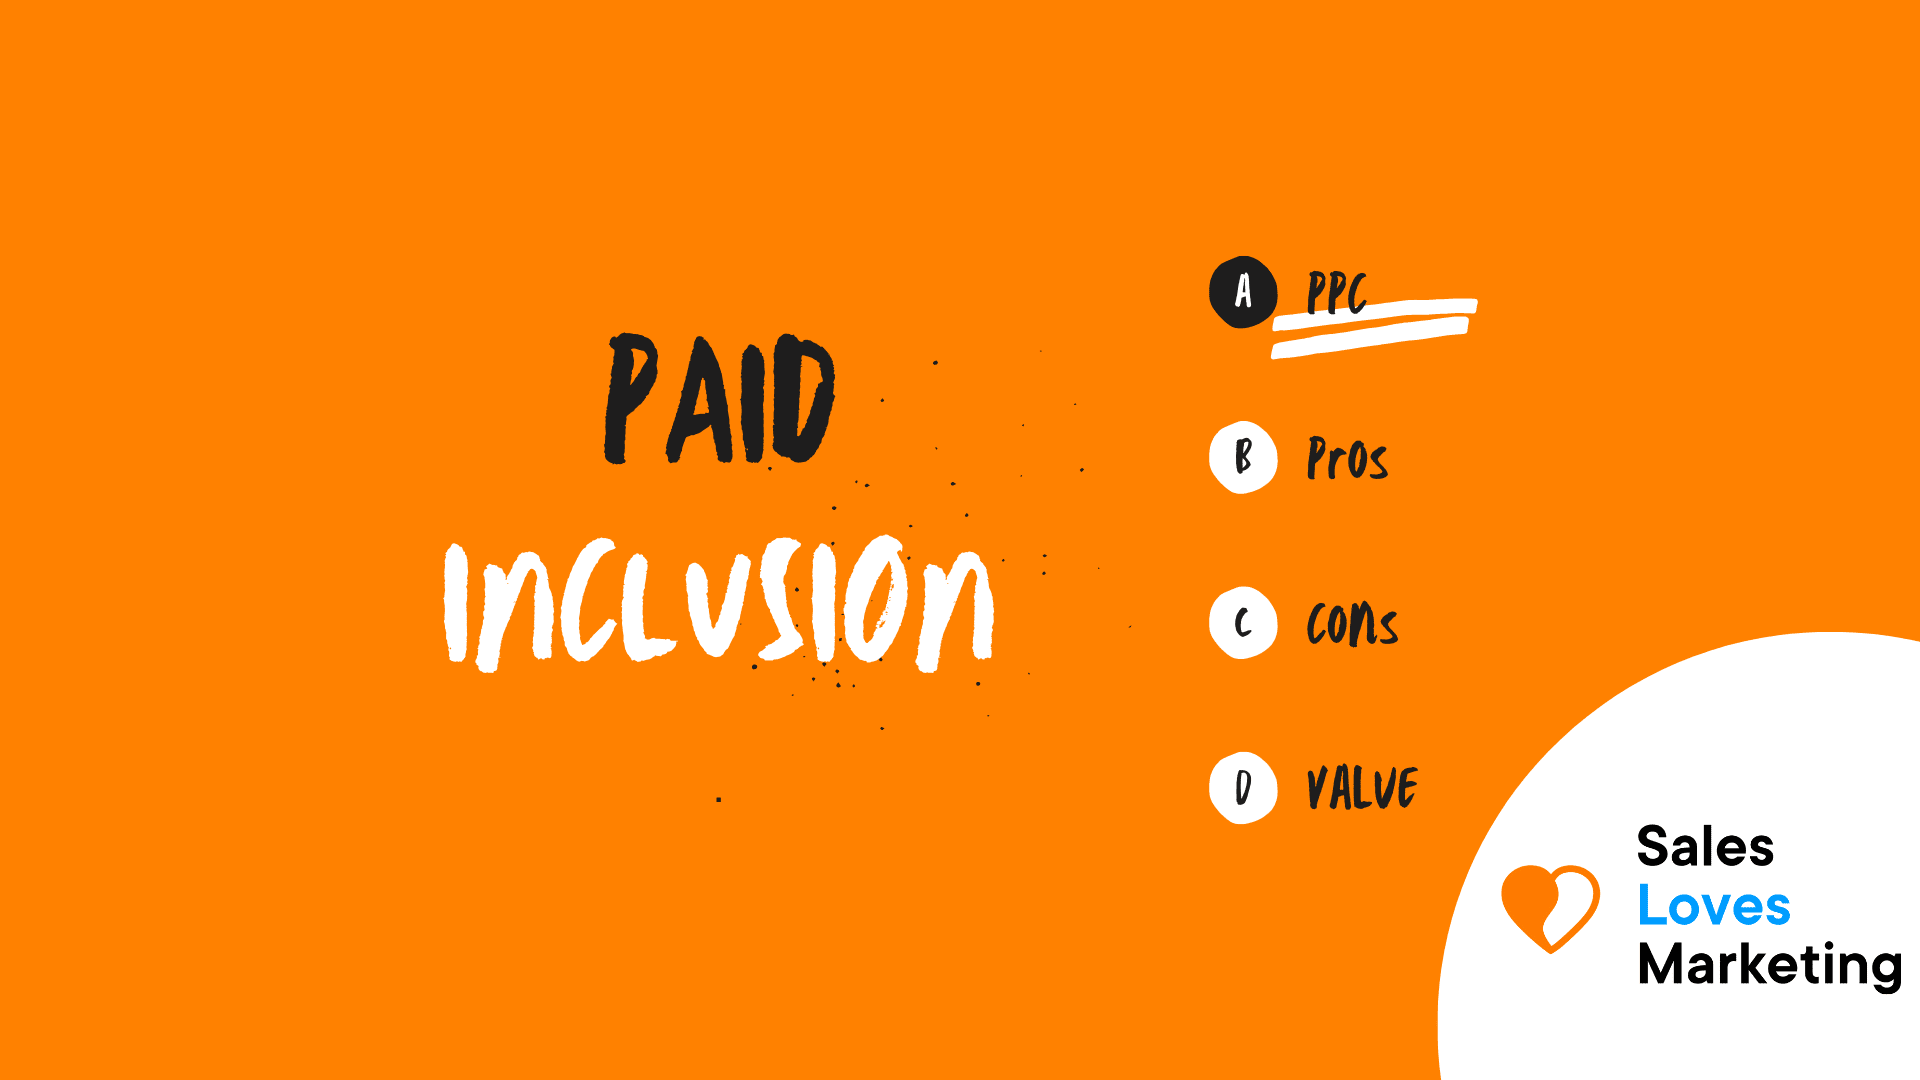 Paid Inclusing